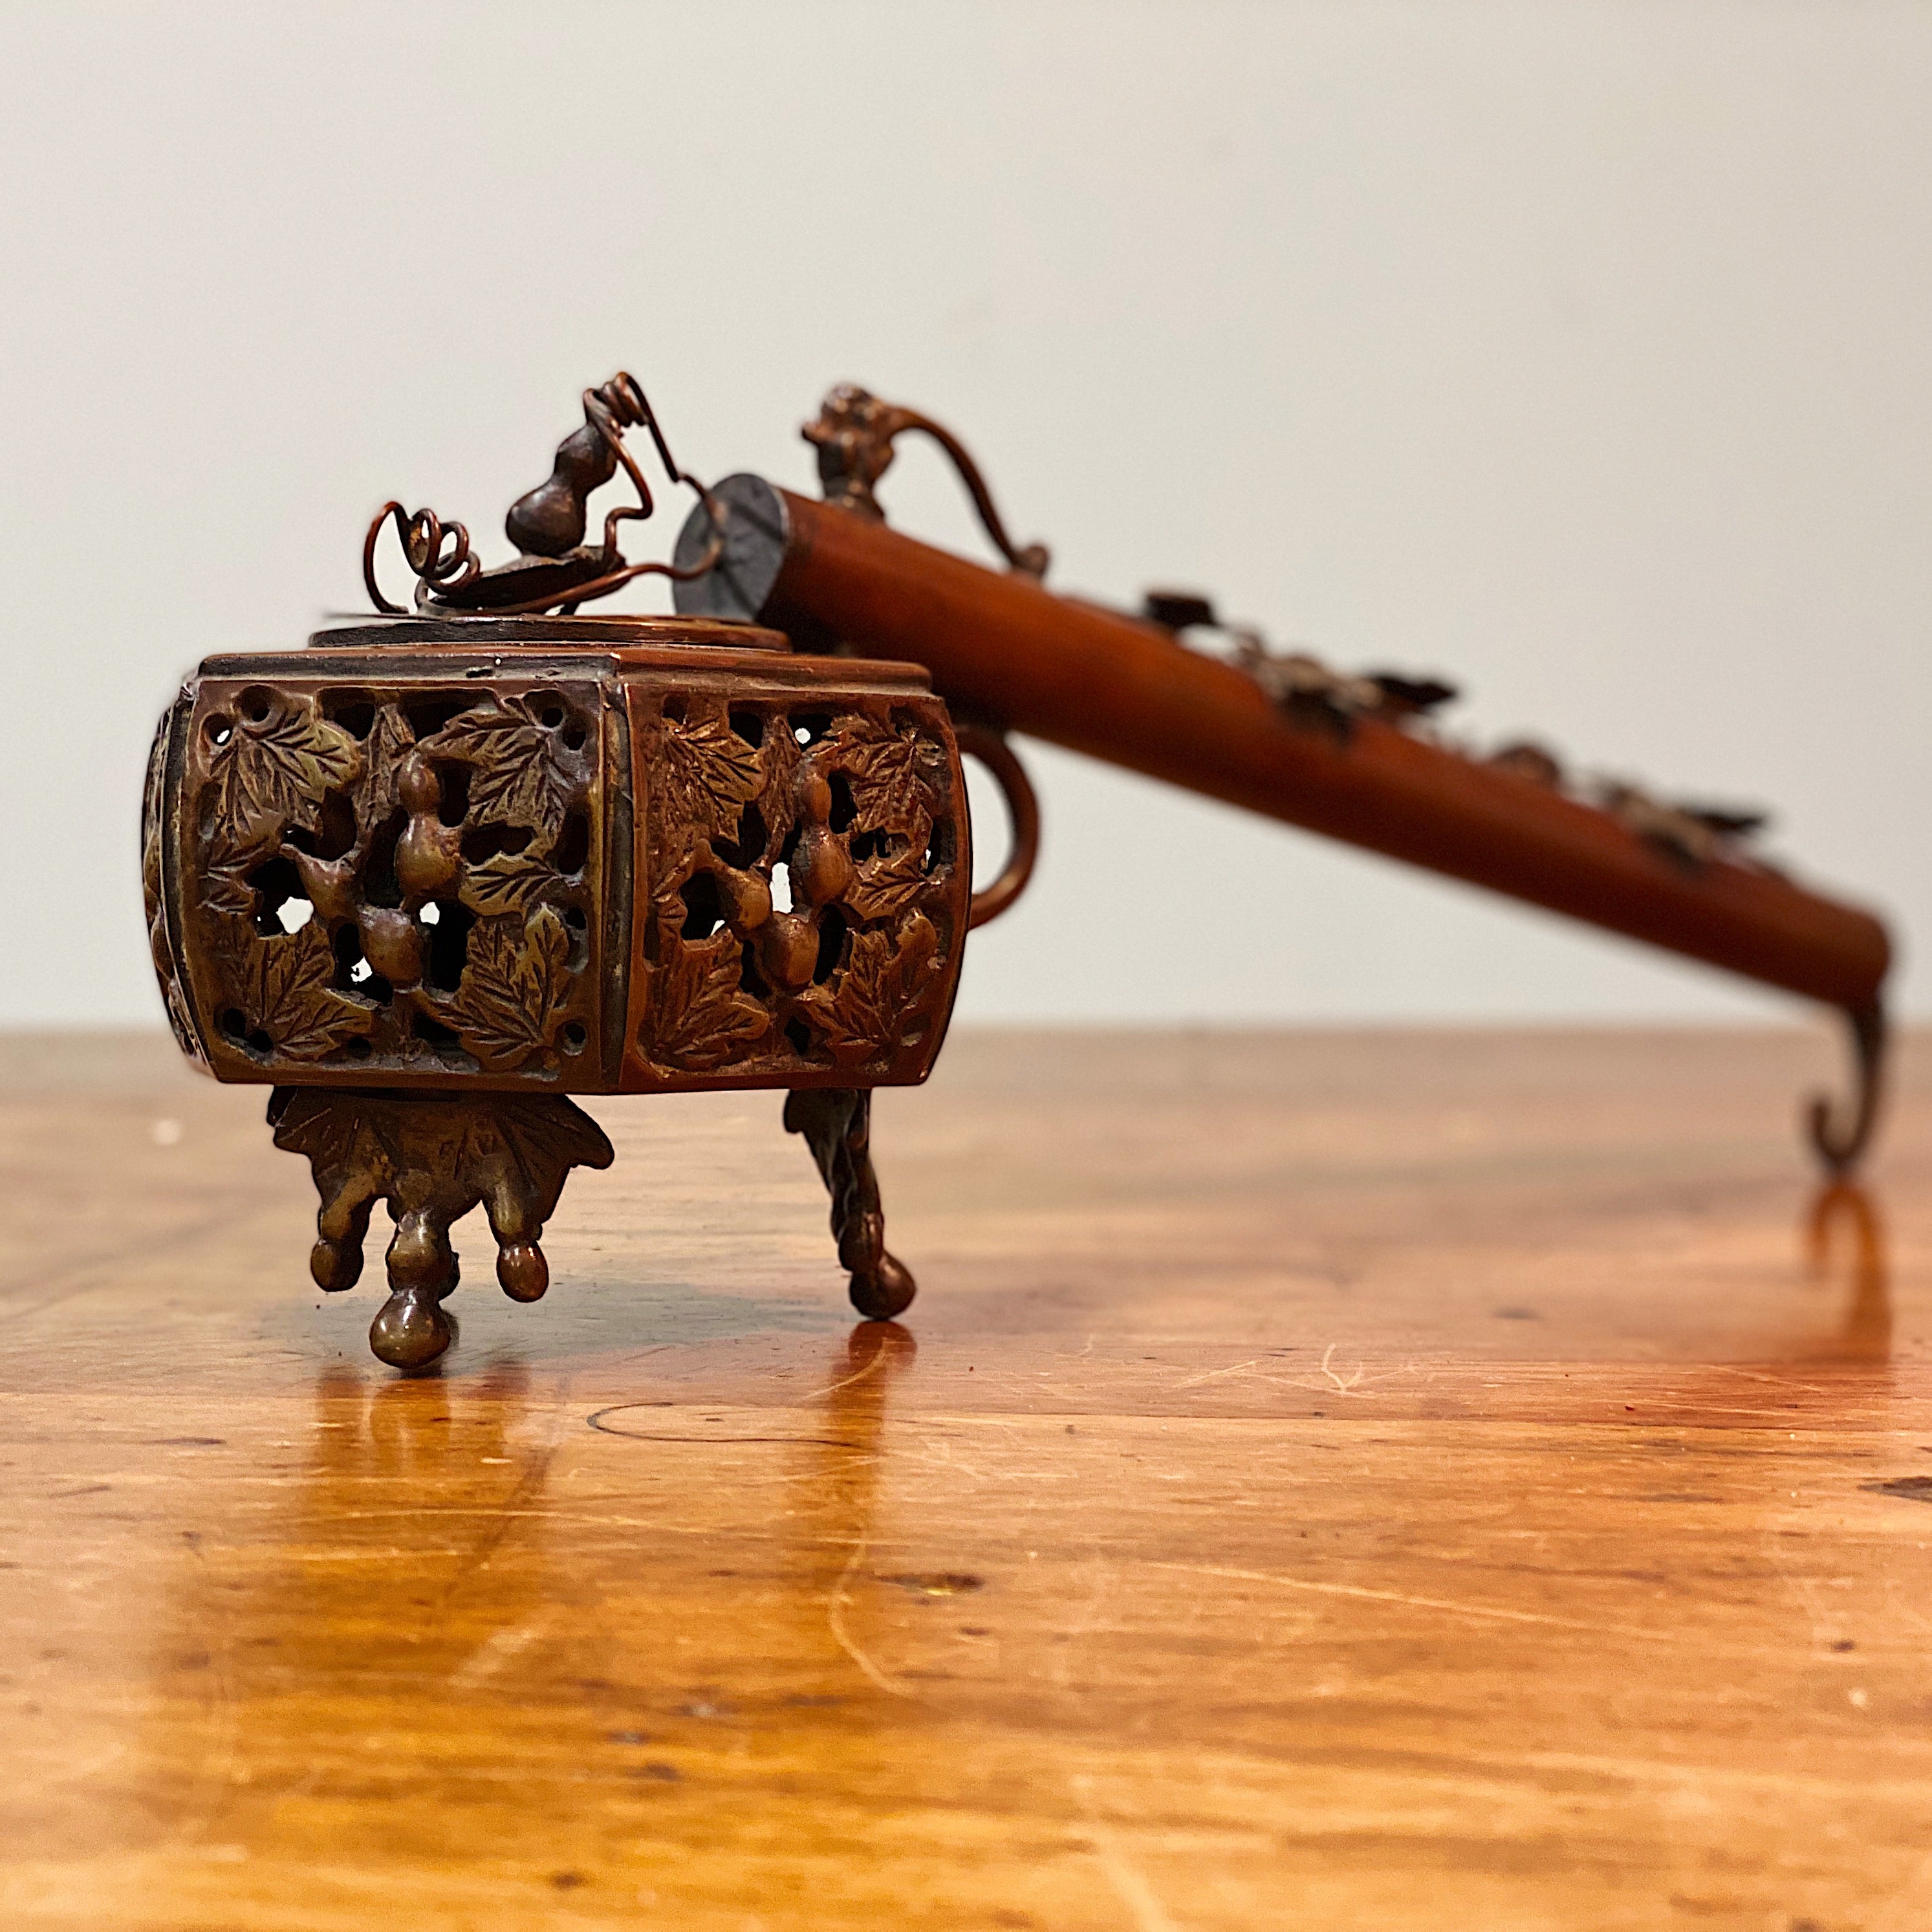 19th Century Yatate Inkwell and Pen Holder - Bronze Japanese Antiques - Rare Writing Collectible - Asian Decor - Opium Pipe Attribution Opium Pipe